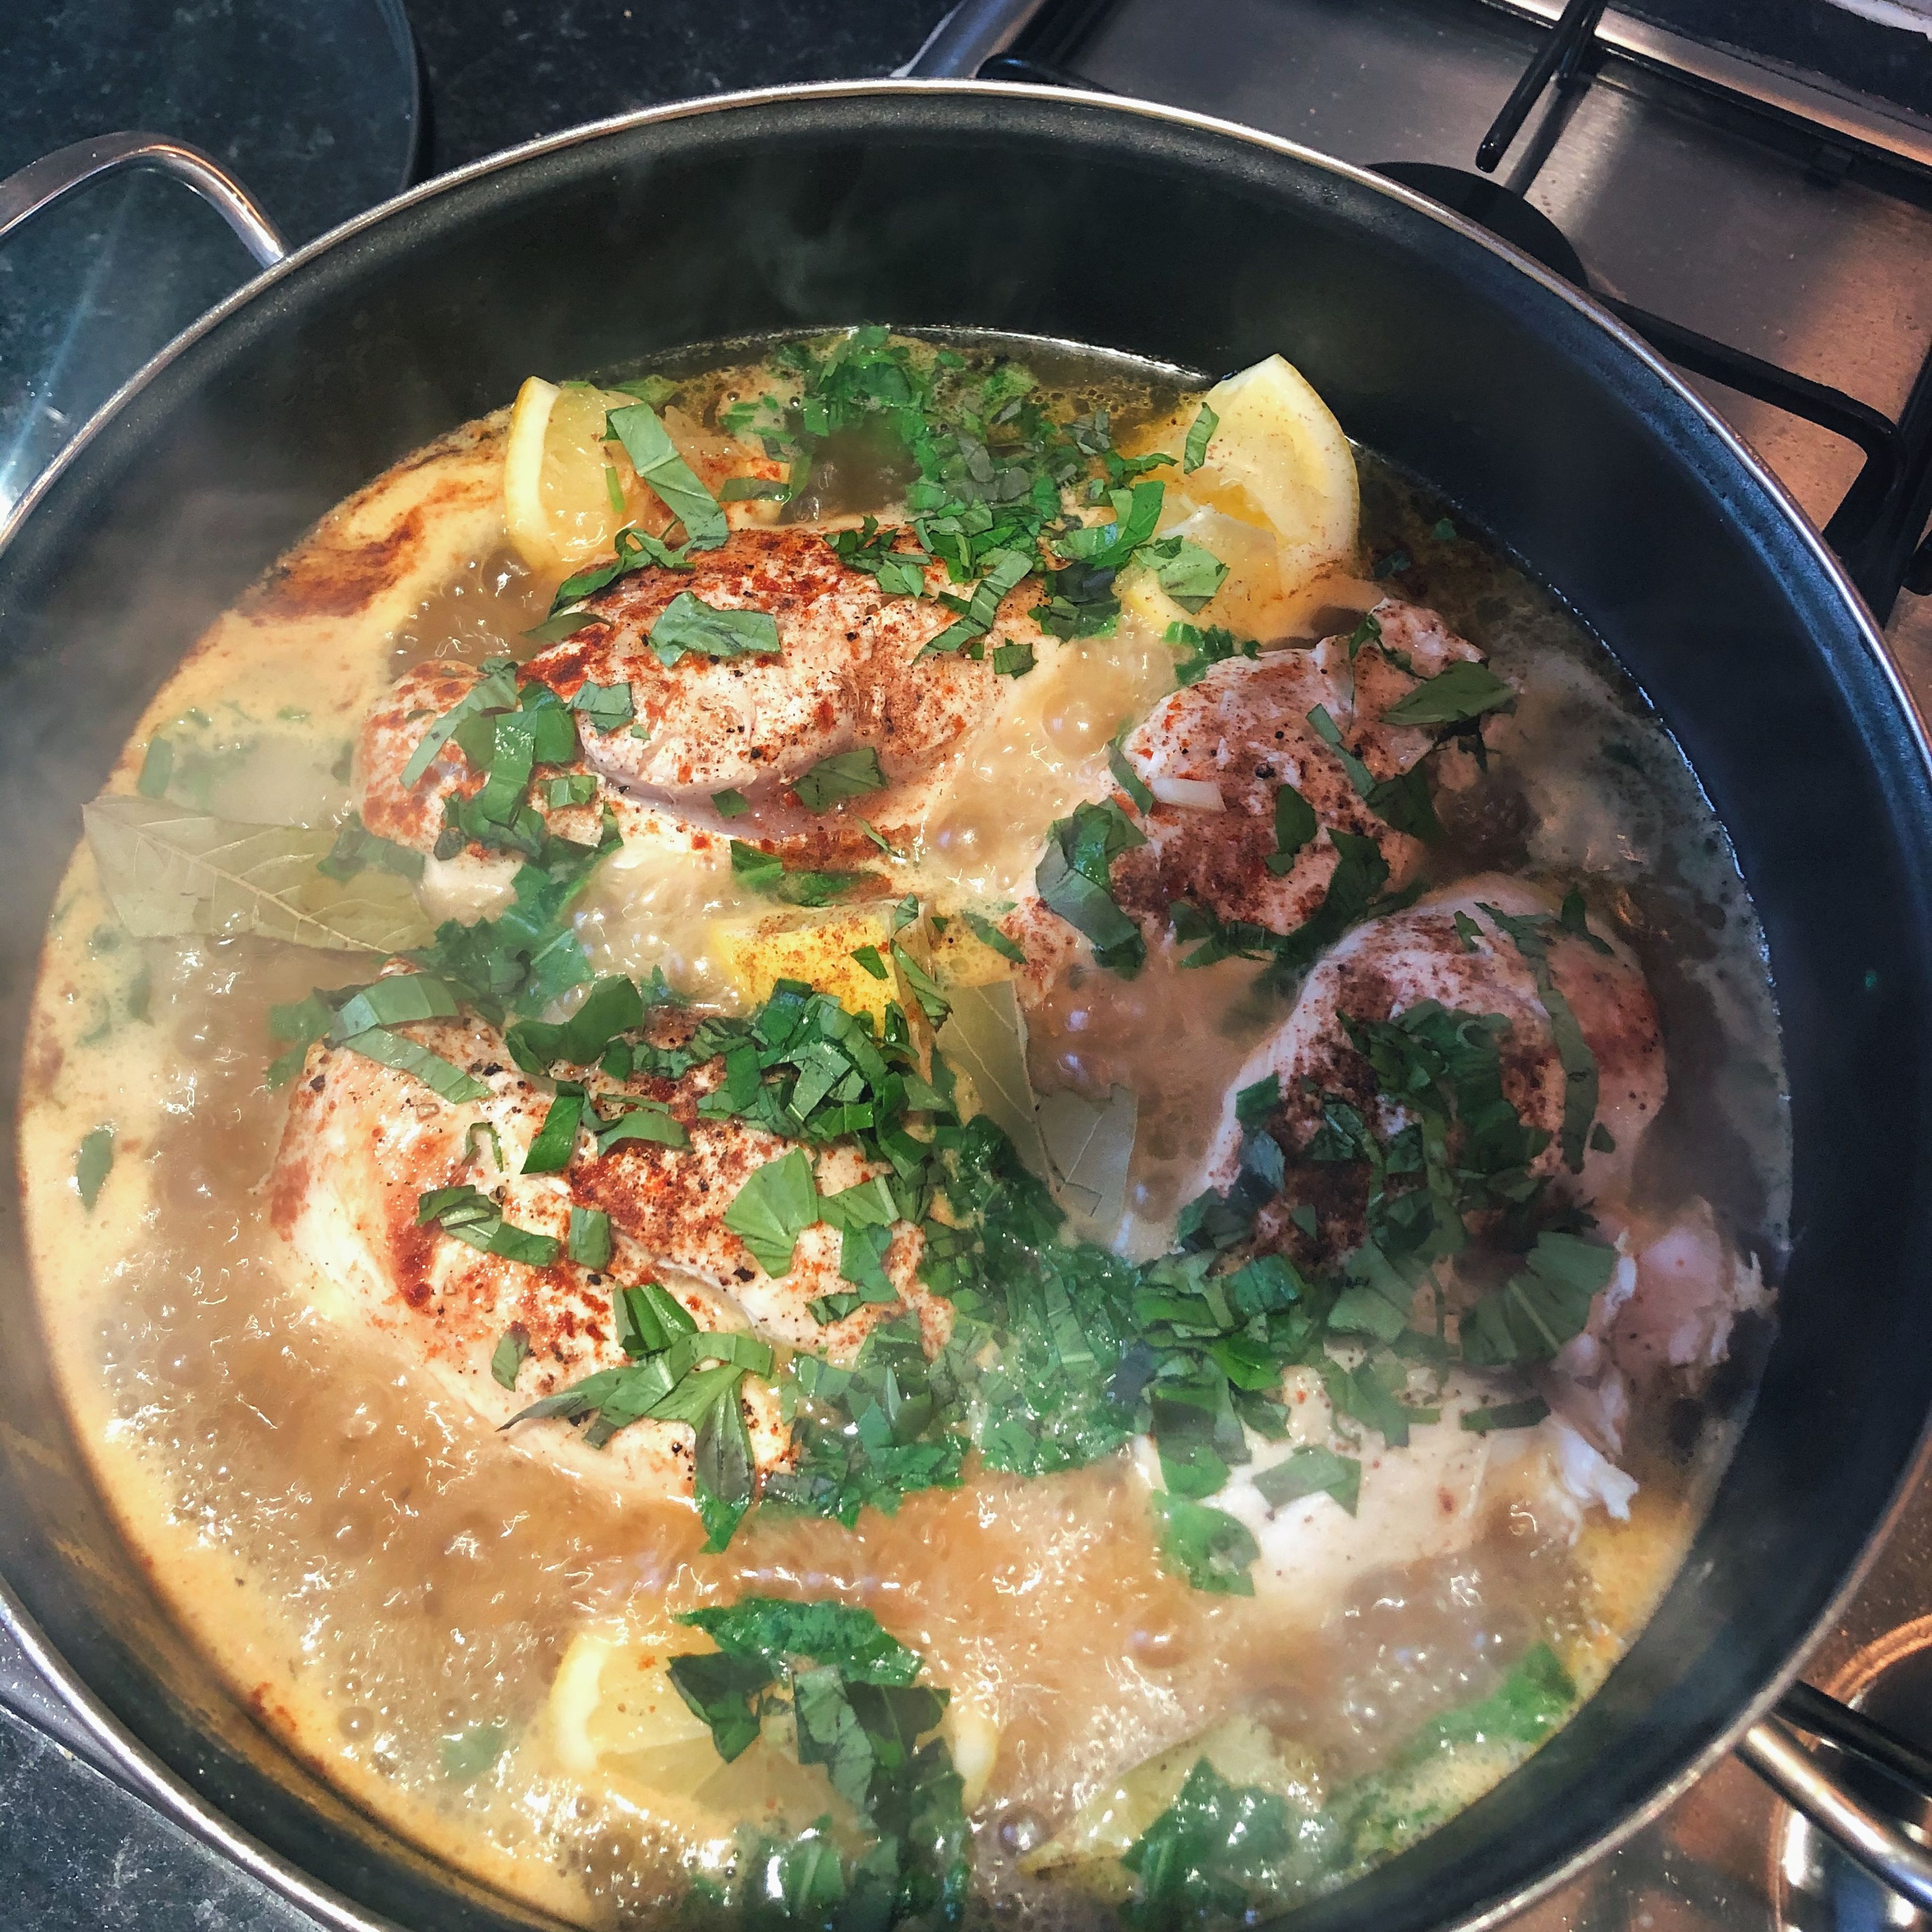 Quarter the lemon, roughly chop onion basil and chives, crush garlic and add to the pan with chicken stock, sugar, bay leaves, nutmeg, paprika and oregano. Season with salt and pepper. Then put lid on and simmer over medium heat for 8 minutes. Stir occasionally.